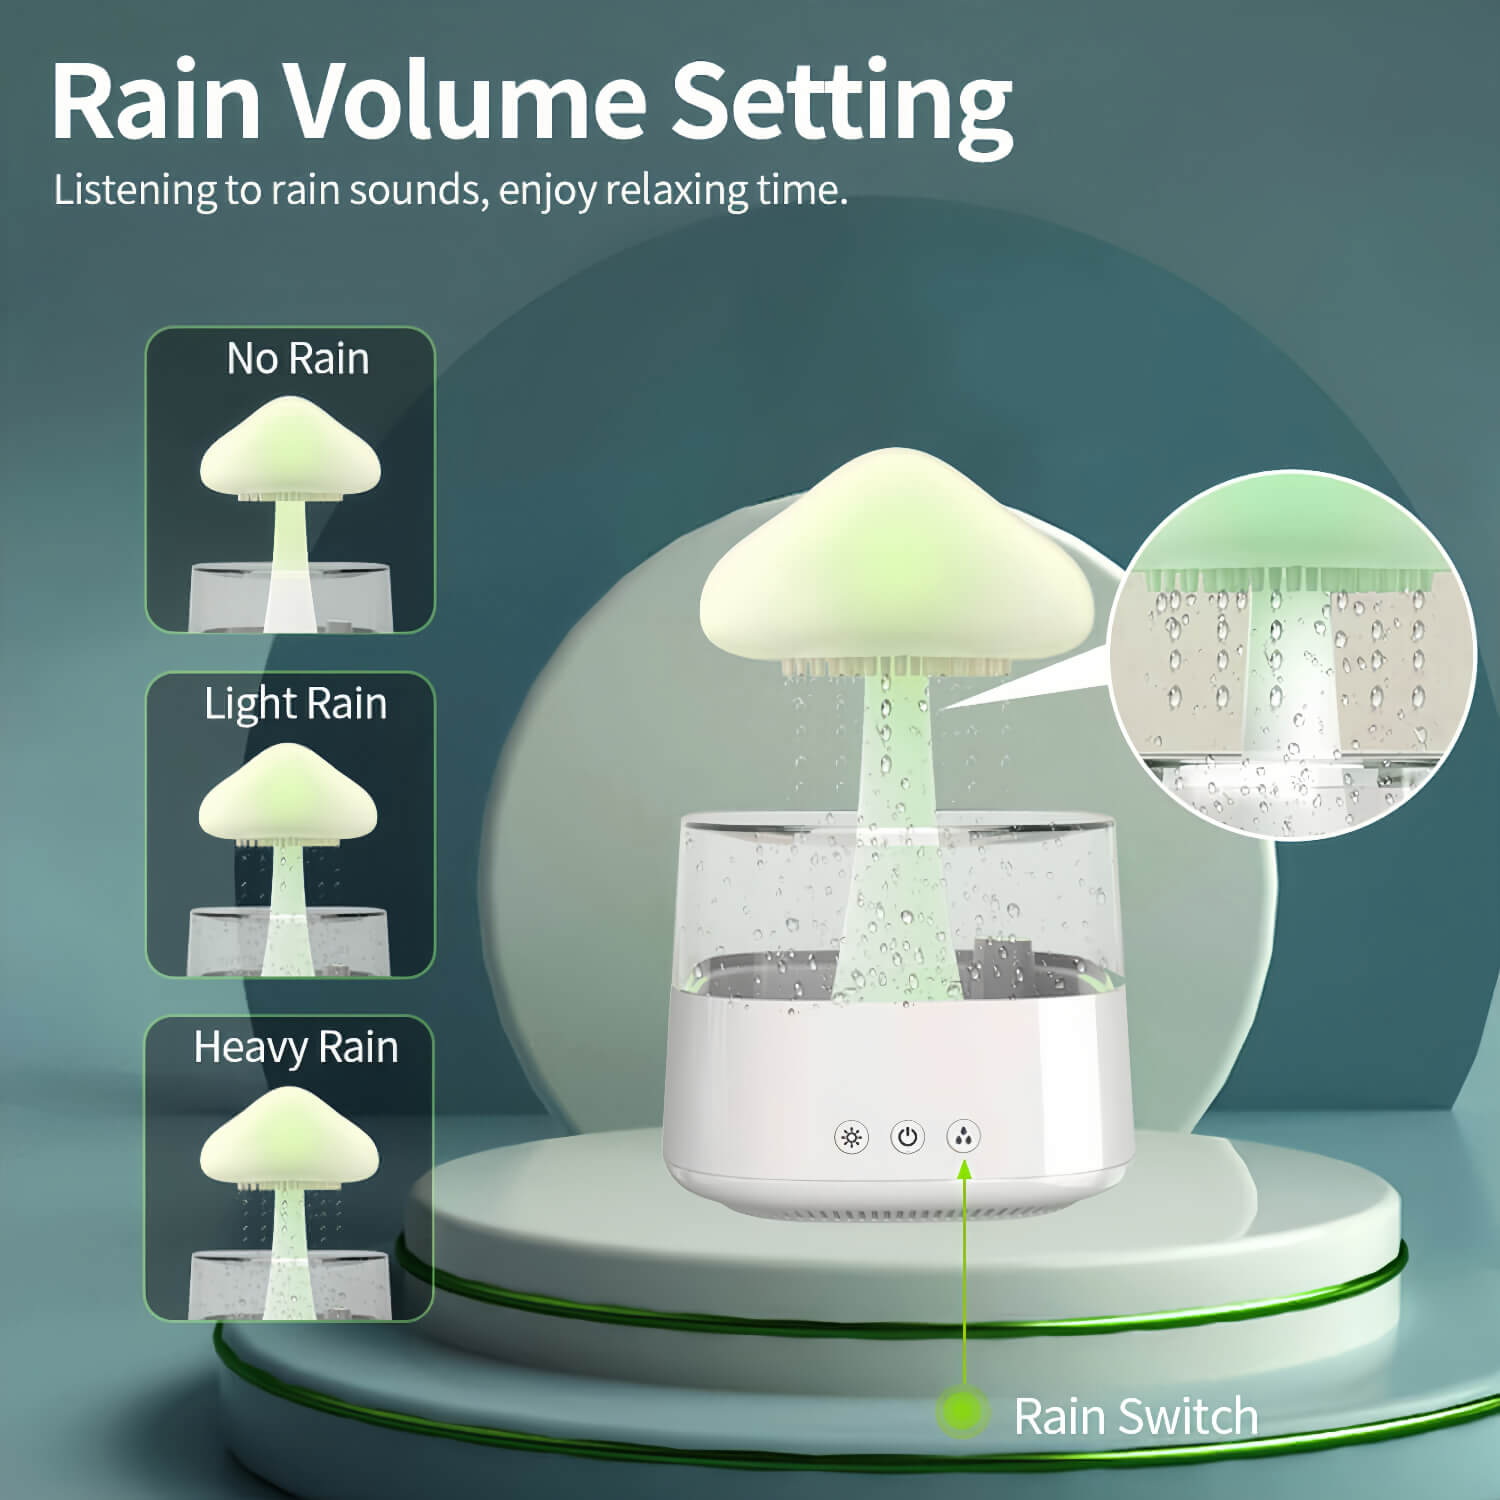 Serene Rain Cloud Diffuser in action, creating a tranquil atmosphere with its raindrop patter.